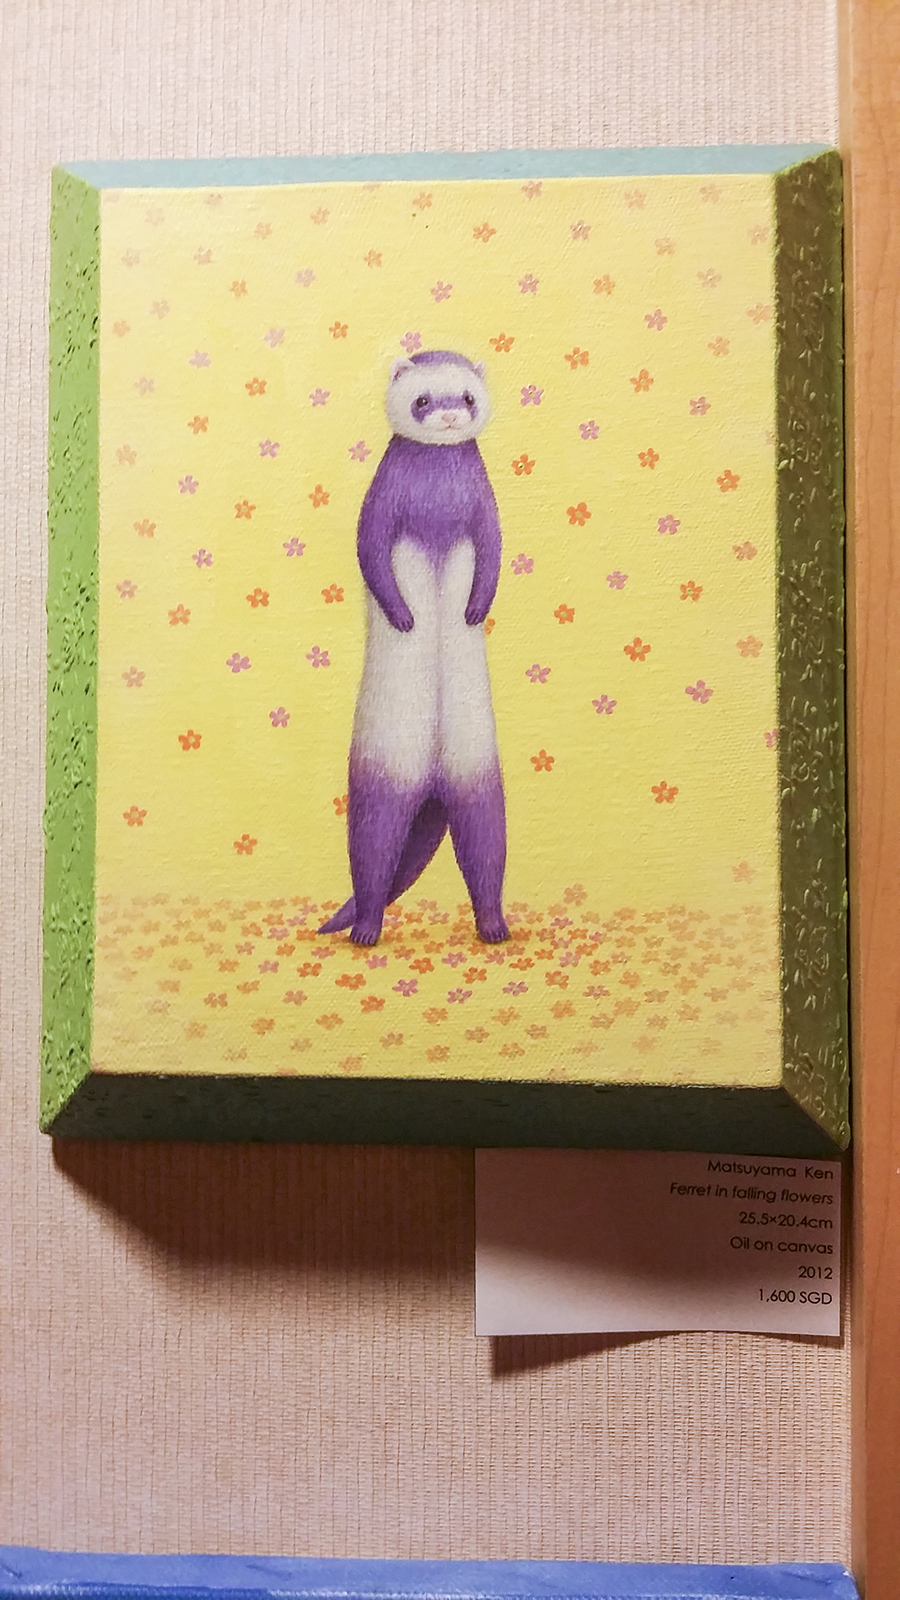 Ferret in Falling Flowers by Matsuyama Ken, oil on canvas at the Bank Art Fair 2014 in Singapore.